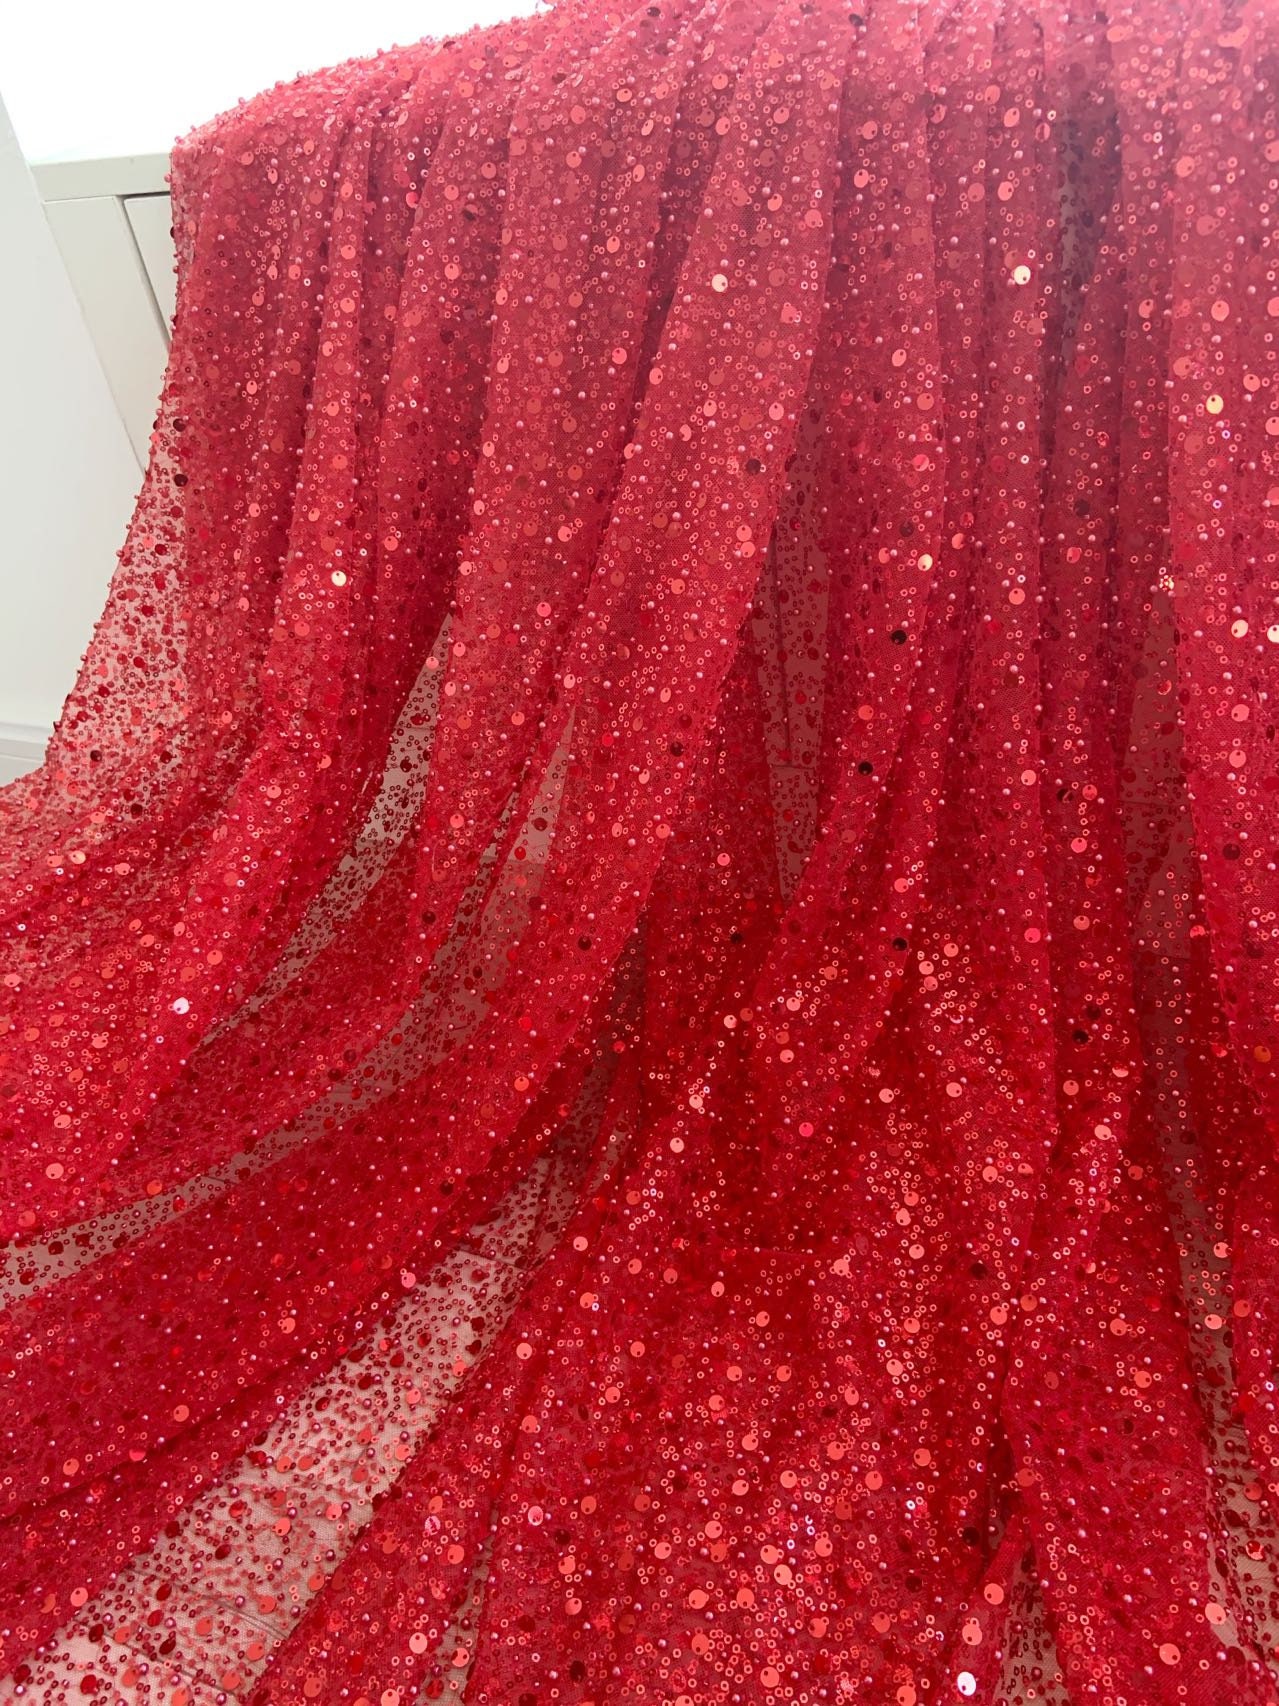 Bright Red Stiff Dense Glitter Tulle Fabric by the Yard - OneYard